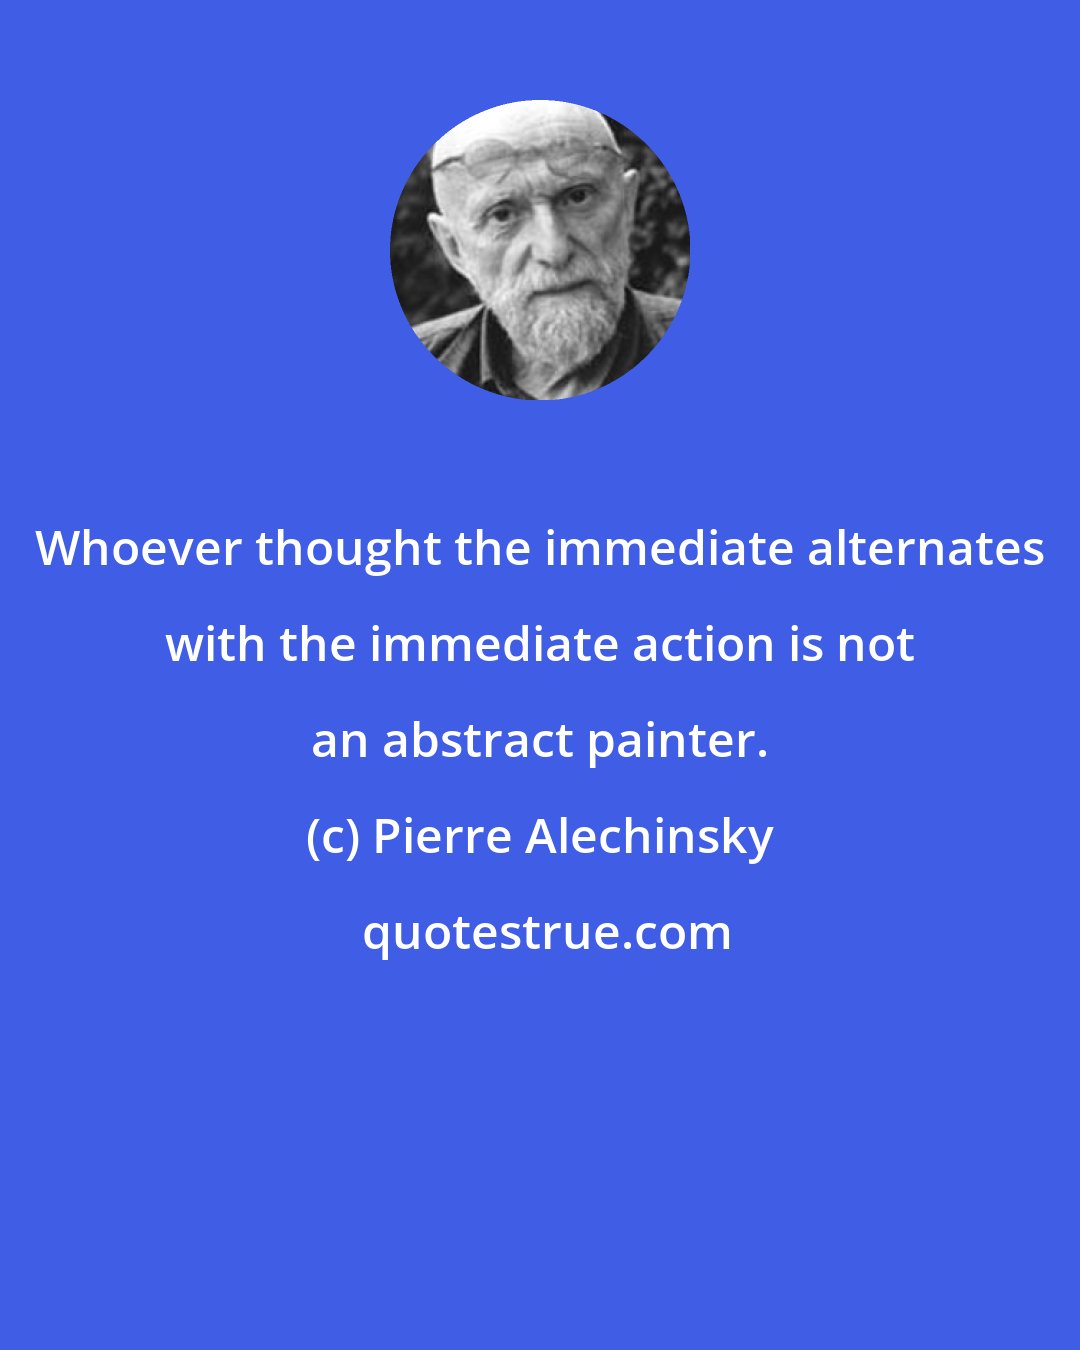 Pierre Alechinsky: Whoever thought the immediate alternates with the immediate action is not an abstract painter.